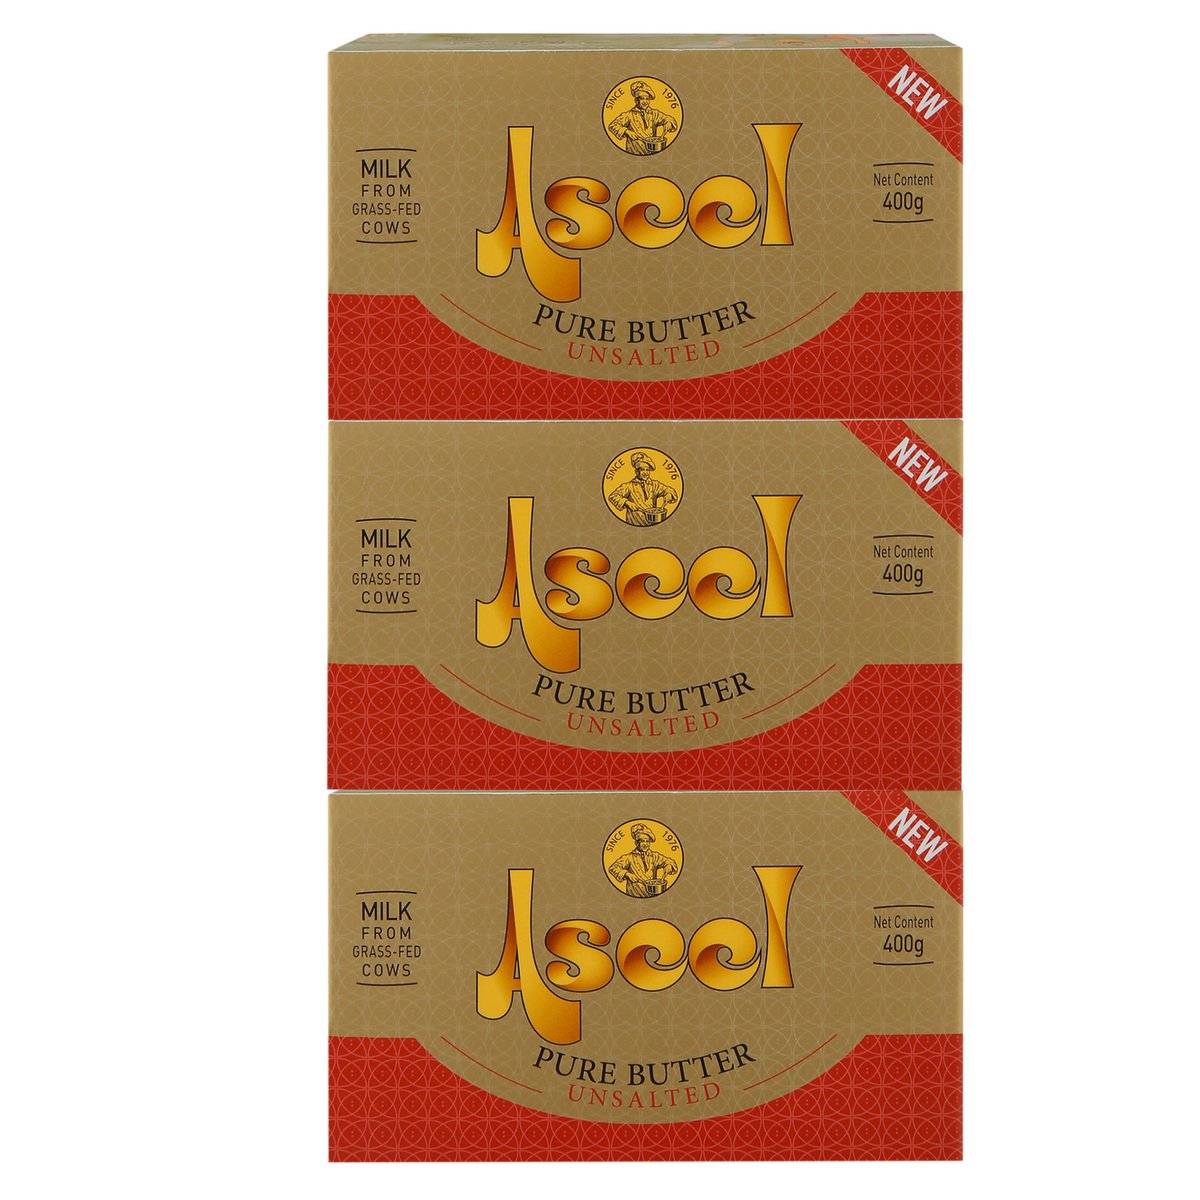 Aseel Pure Butter Unsalted 3 x 400 g